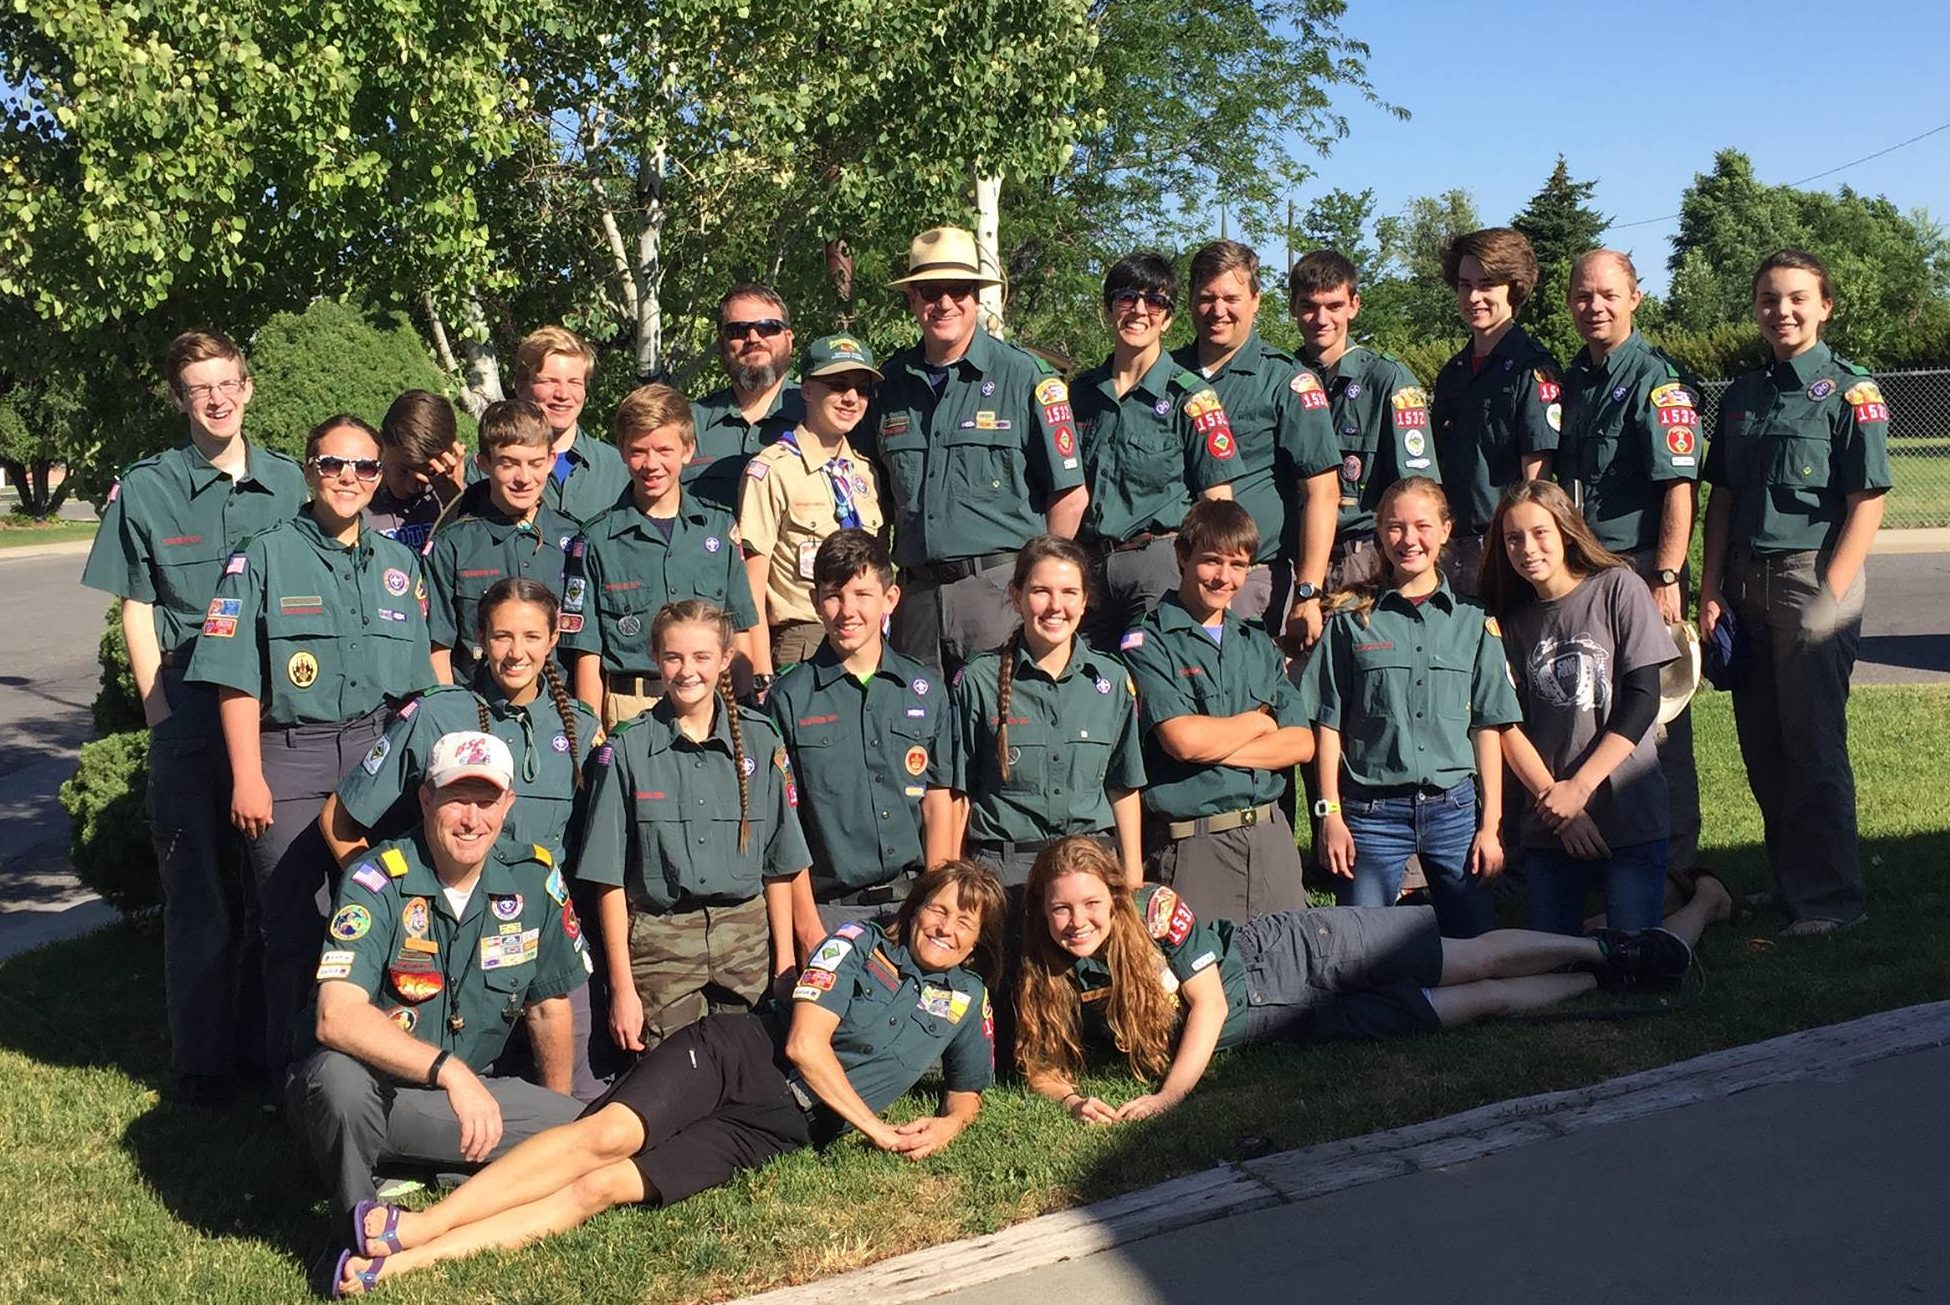 Mormon Church breaks all ties with Boy Scouts, ending 100-year